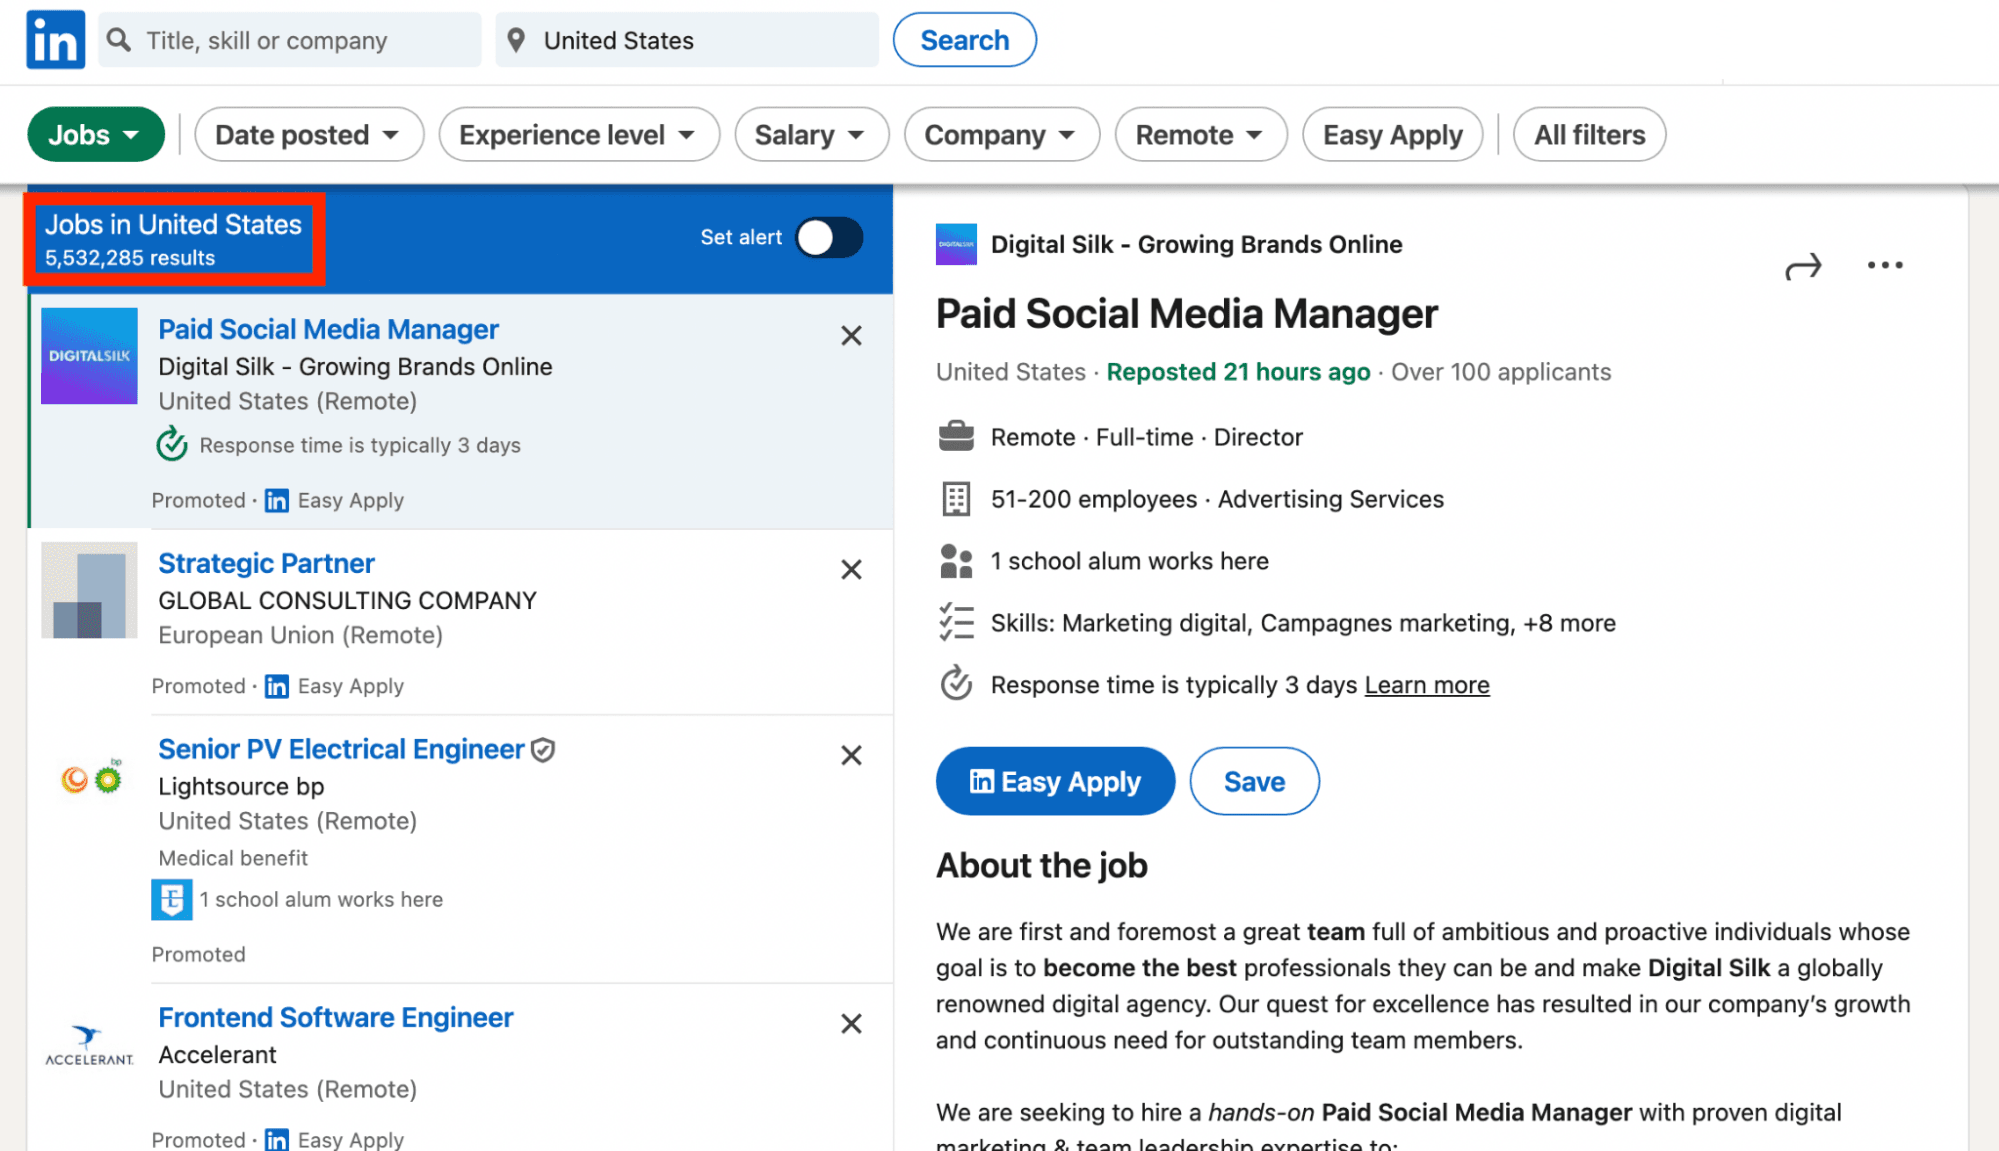 linkedin job search results in the usa - image37.png